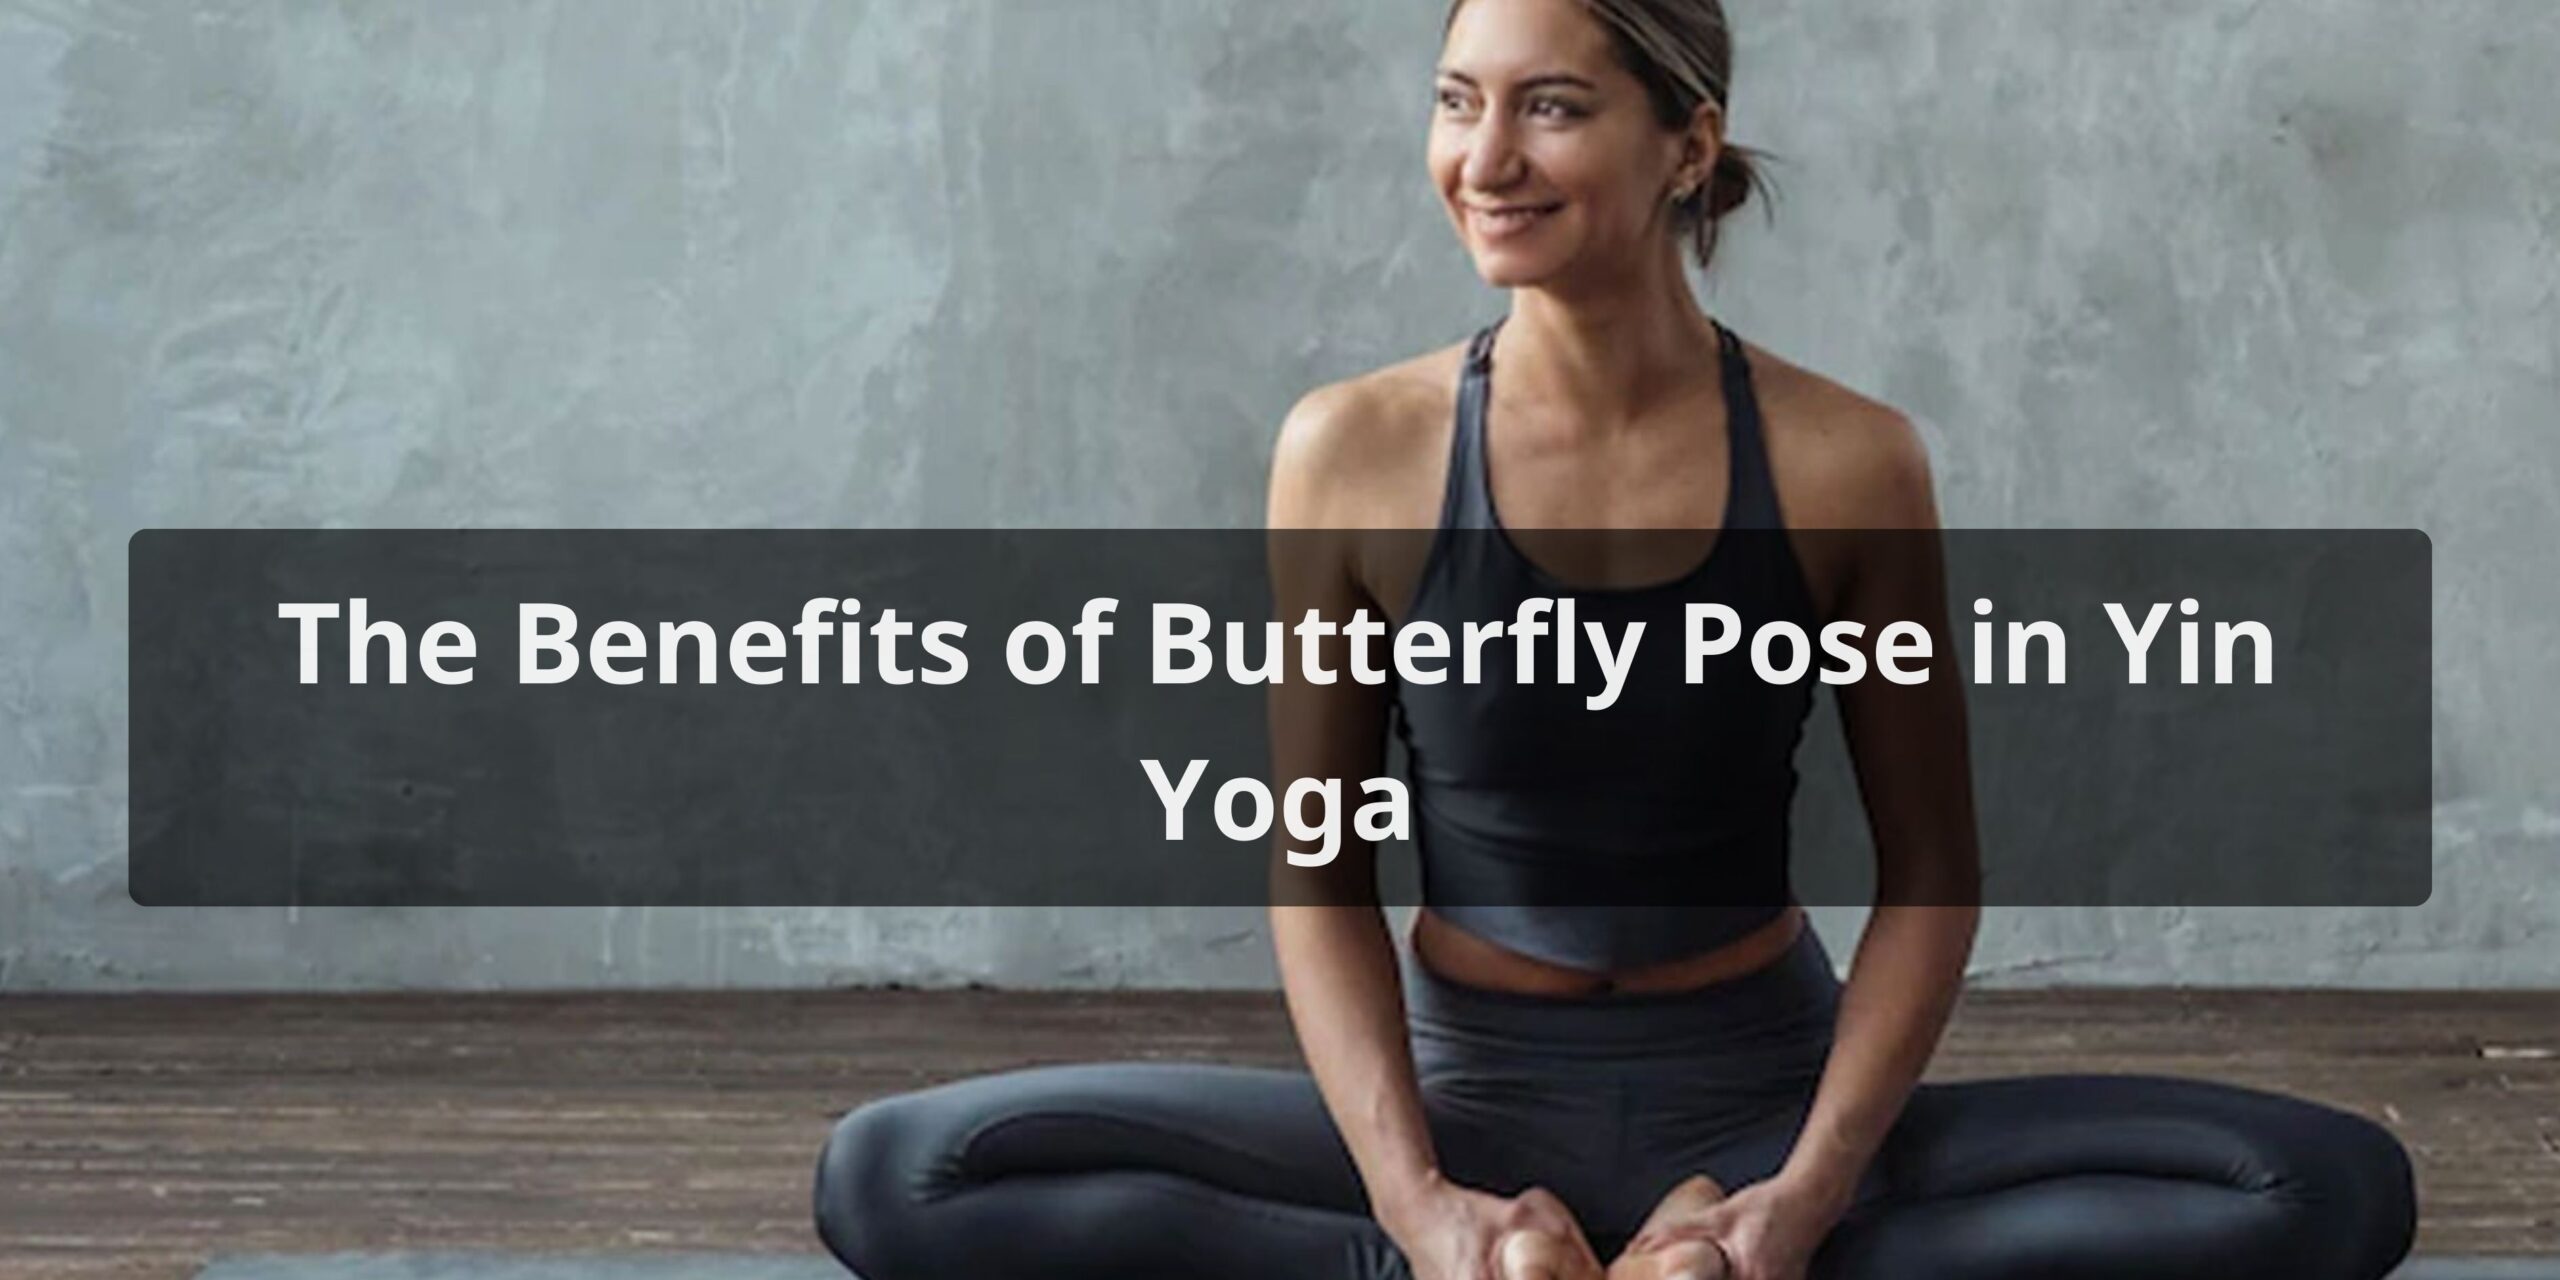 The Benefits of Butterfly Pose in Yin Yoga